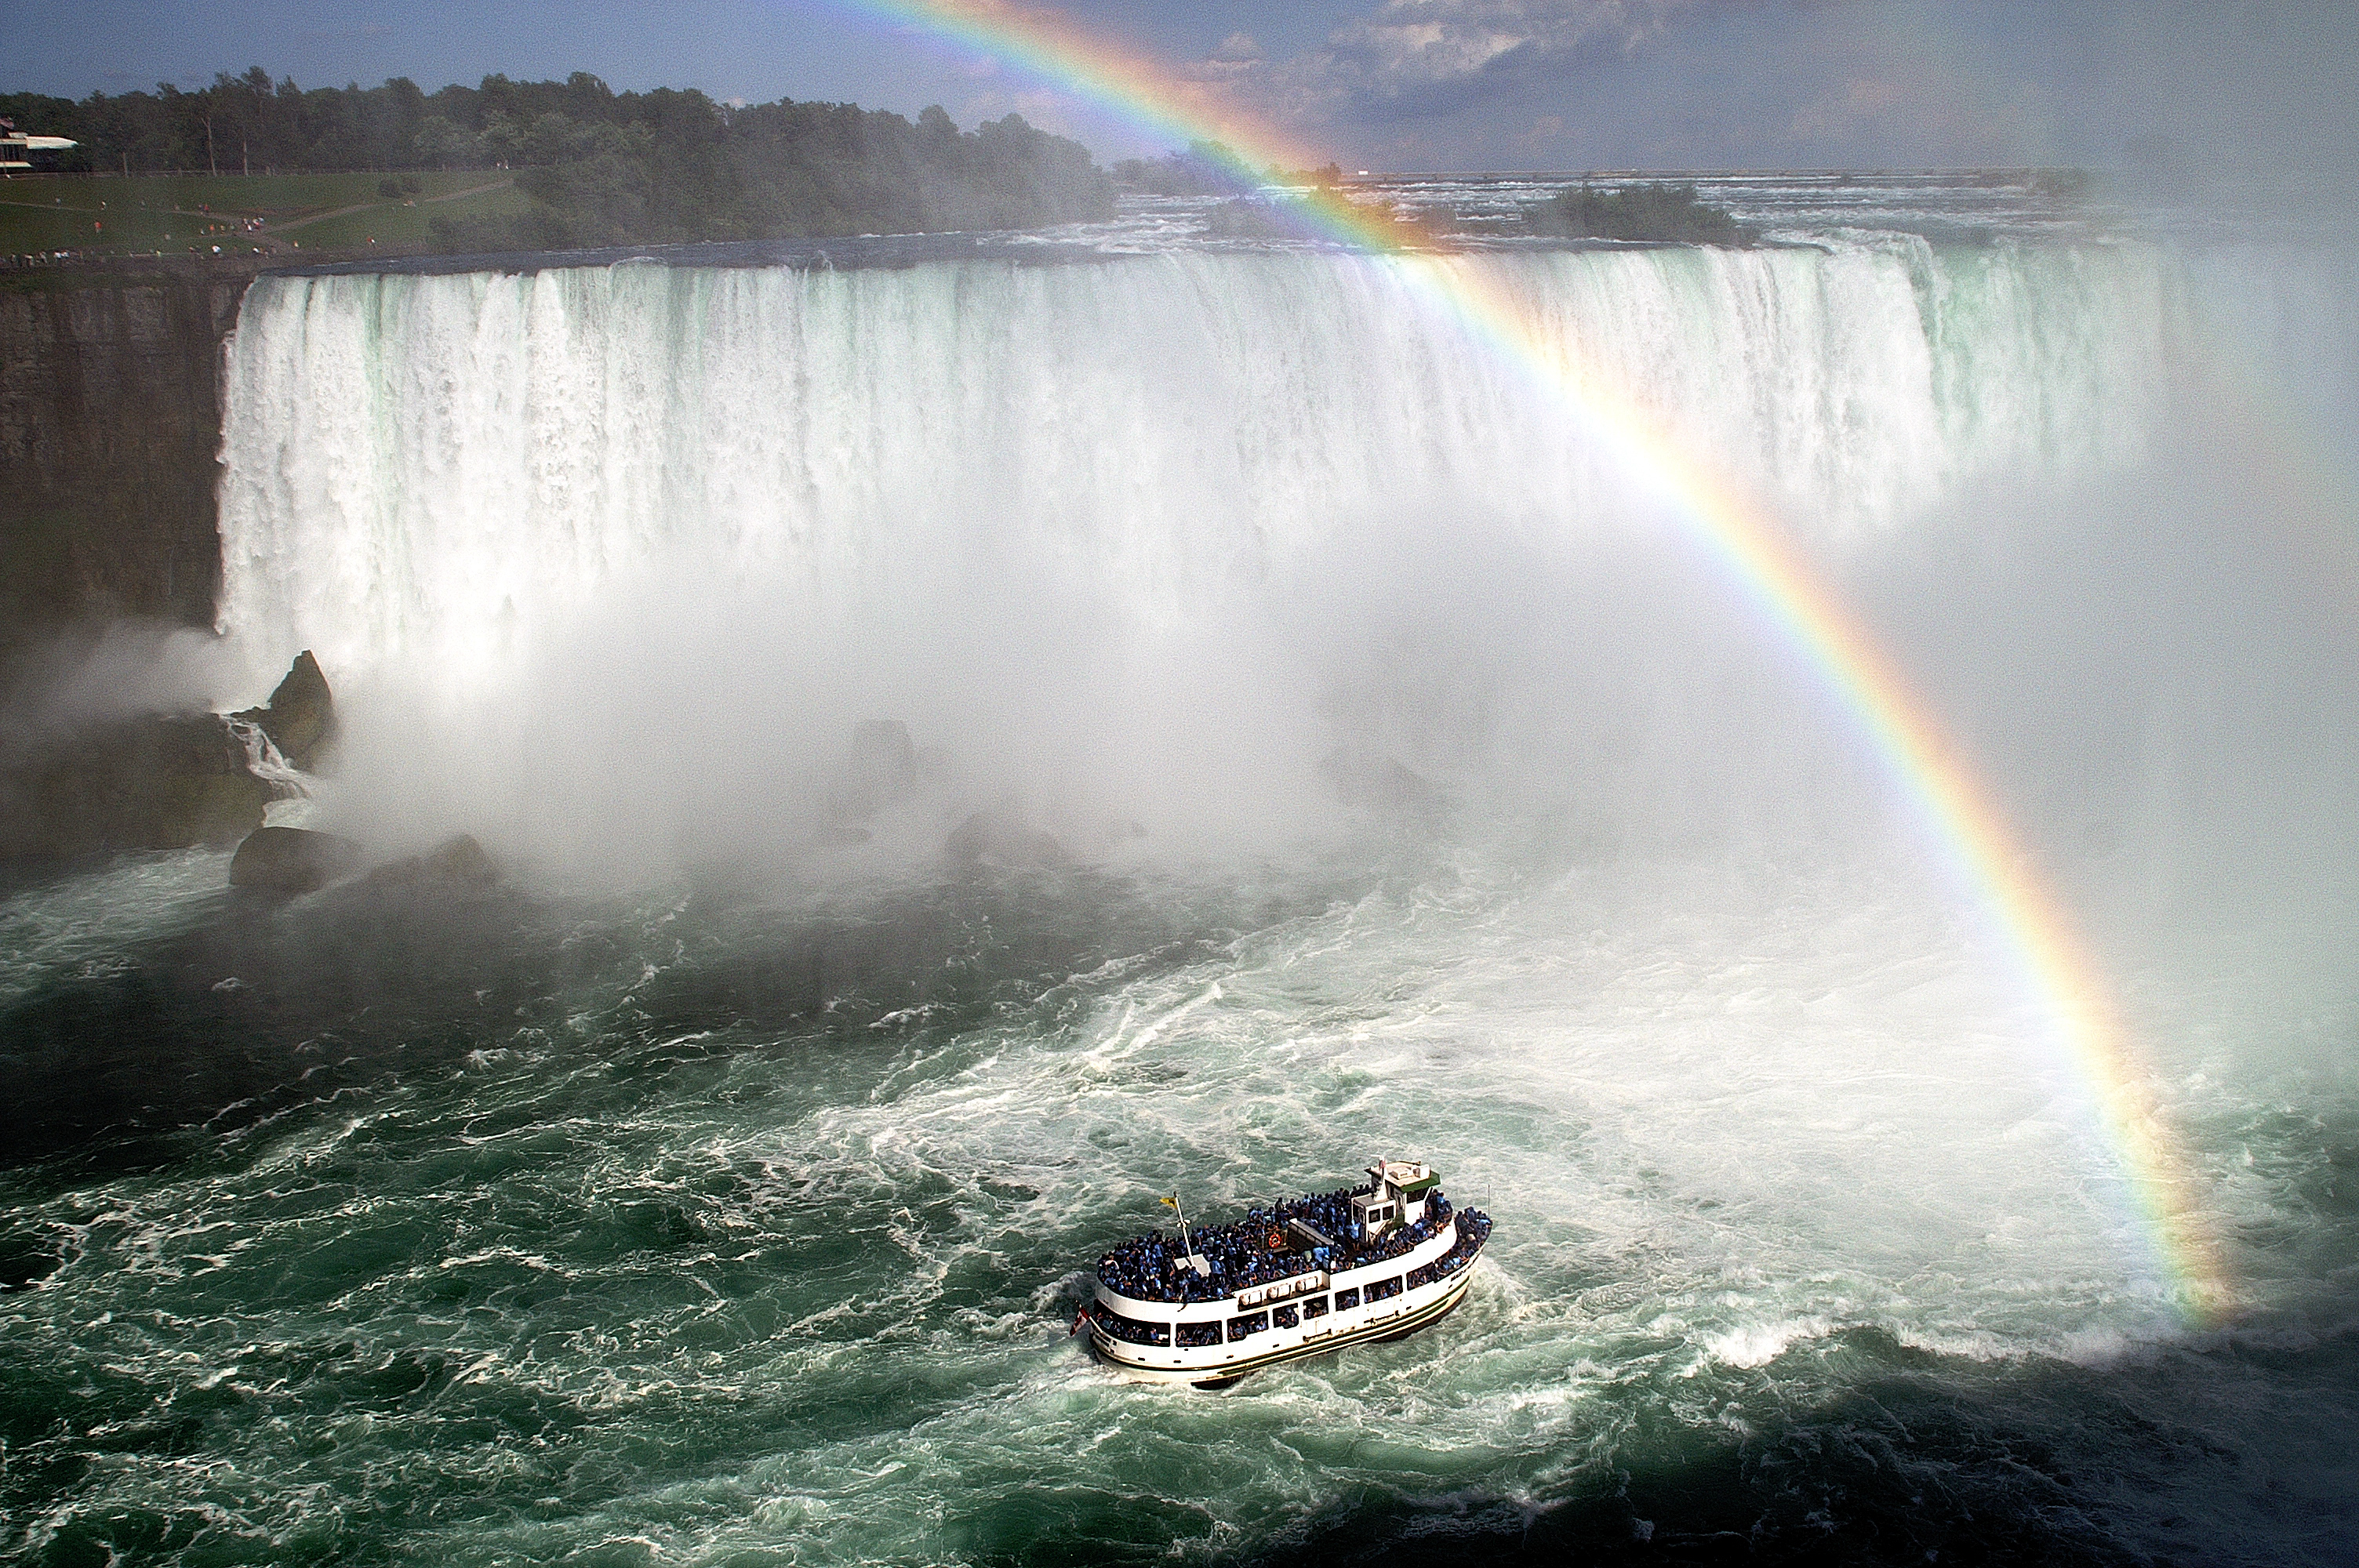 Named after the Native American folklore heroine, the ship Maid of the Mist tours Niagara Falls. (SaffronBlaze: https://commons.wikimedia.org/wiki/File:Maid-of-the-Mist_Rainbow.jpg)